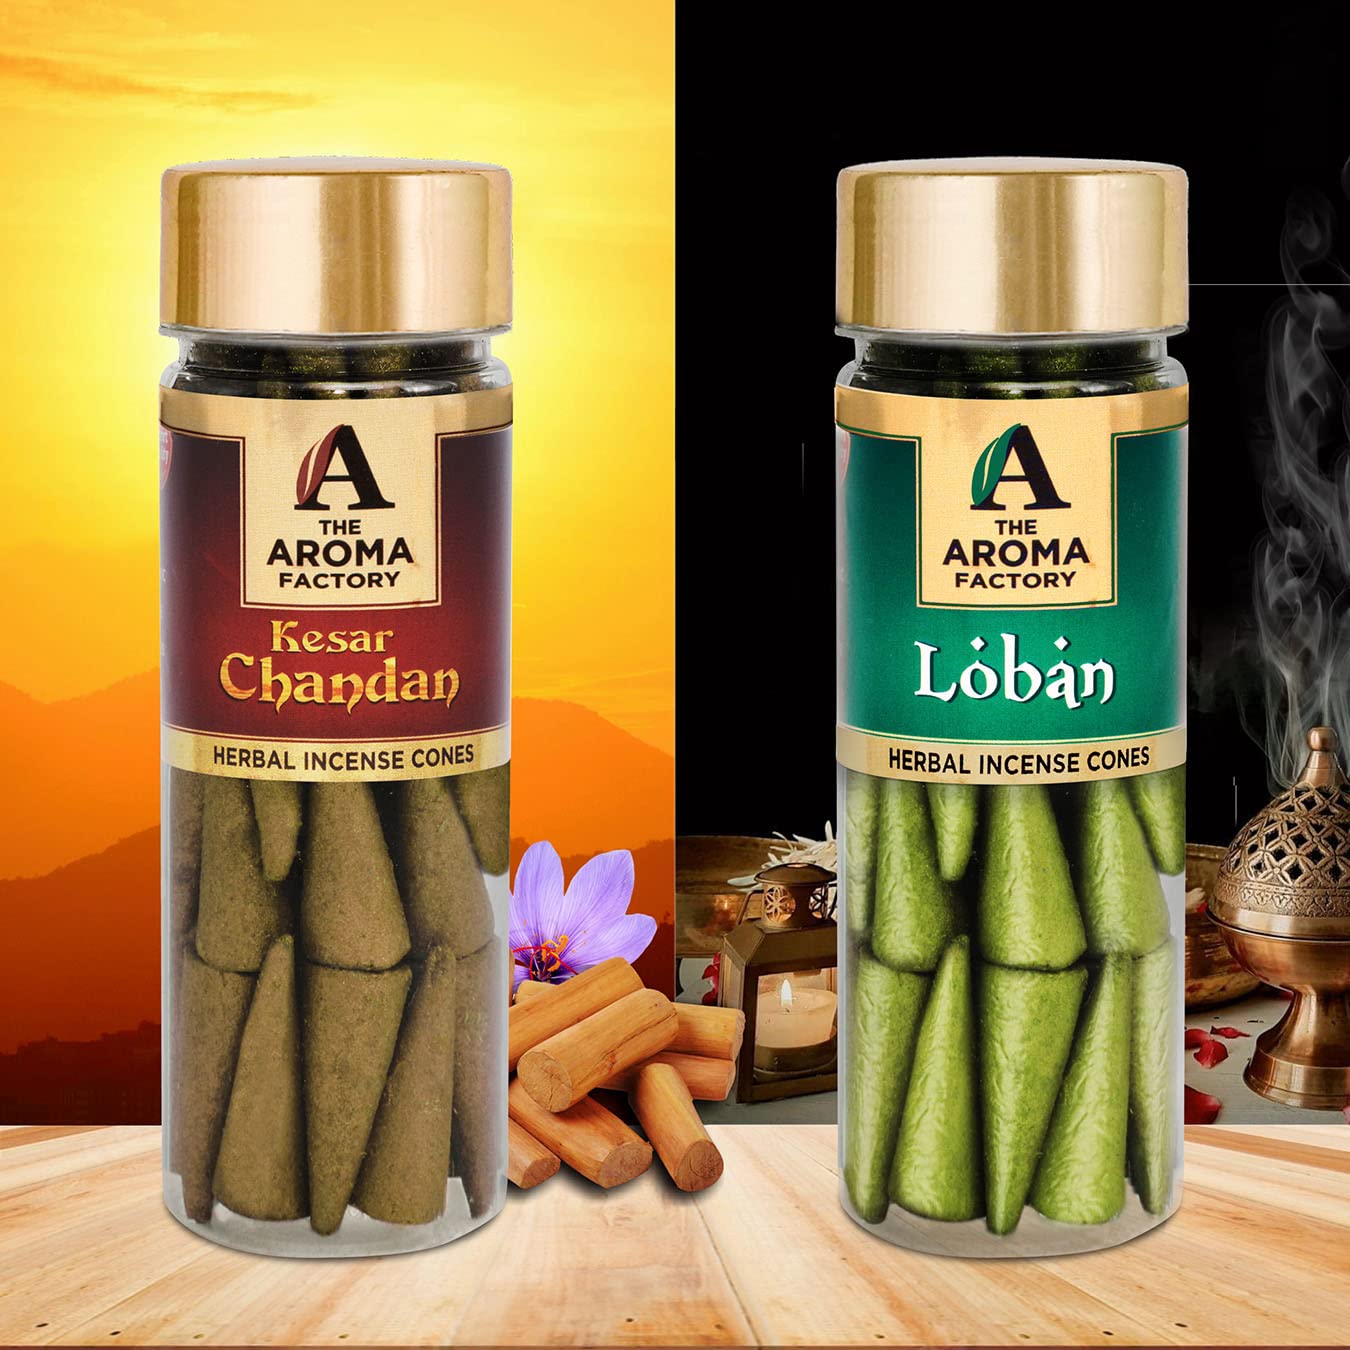 The Aroma Factory Incense Dhoop Cone for Pooja, Kesar Chandan & Loban (100% Herbal & 0% Charcoal) 2 Bottles x 30 Cones